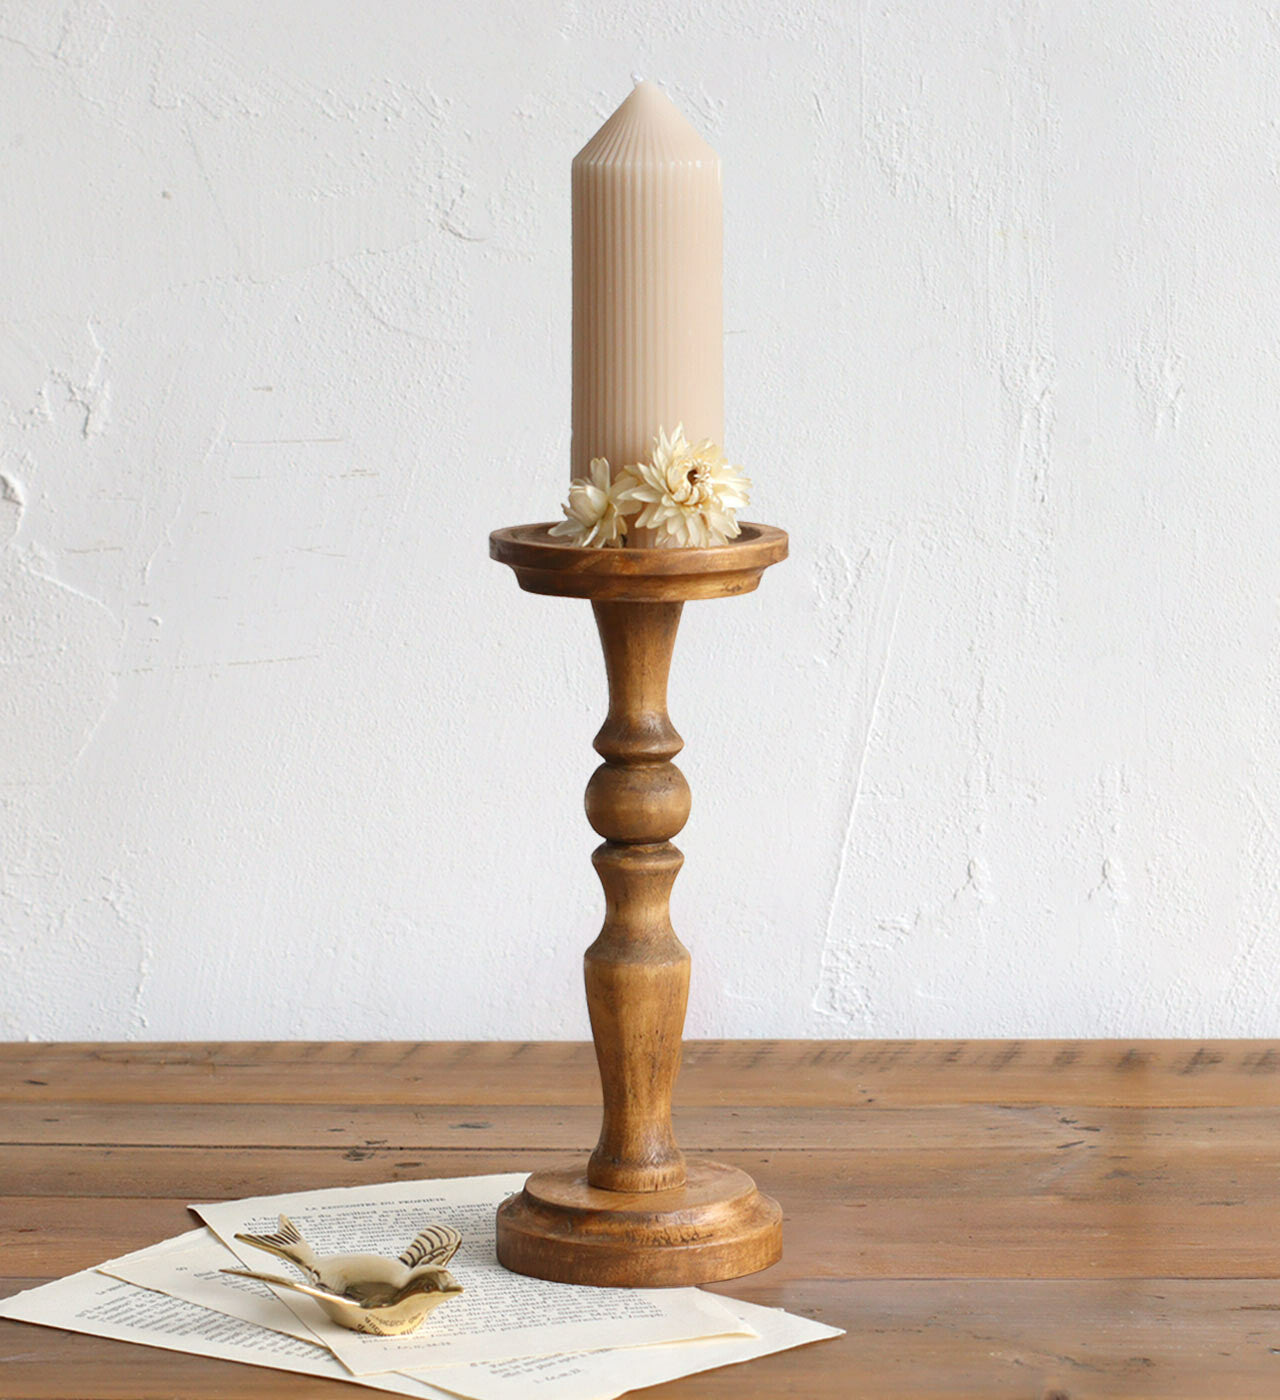 Pine Candle Stand L 2pcs